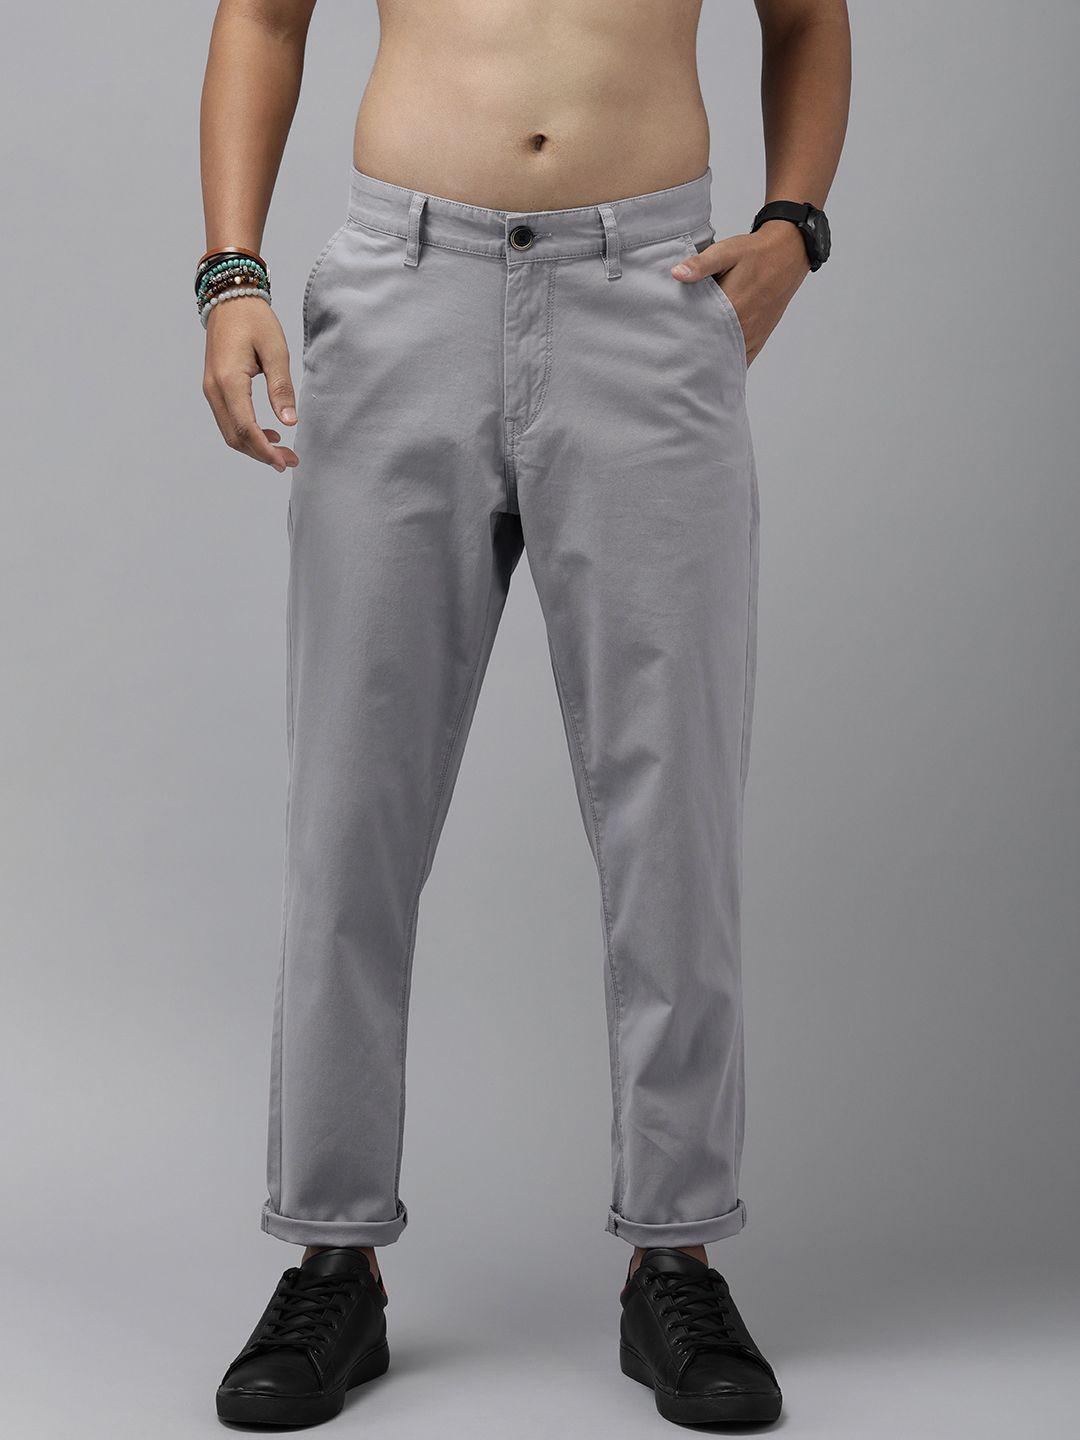 the roadster lifestyle co. men loose fit low-rise trousers